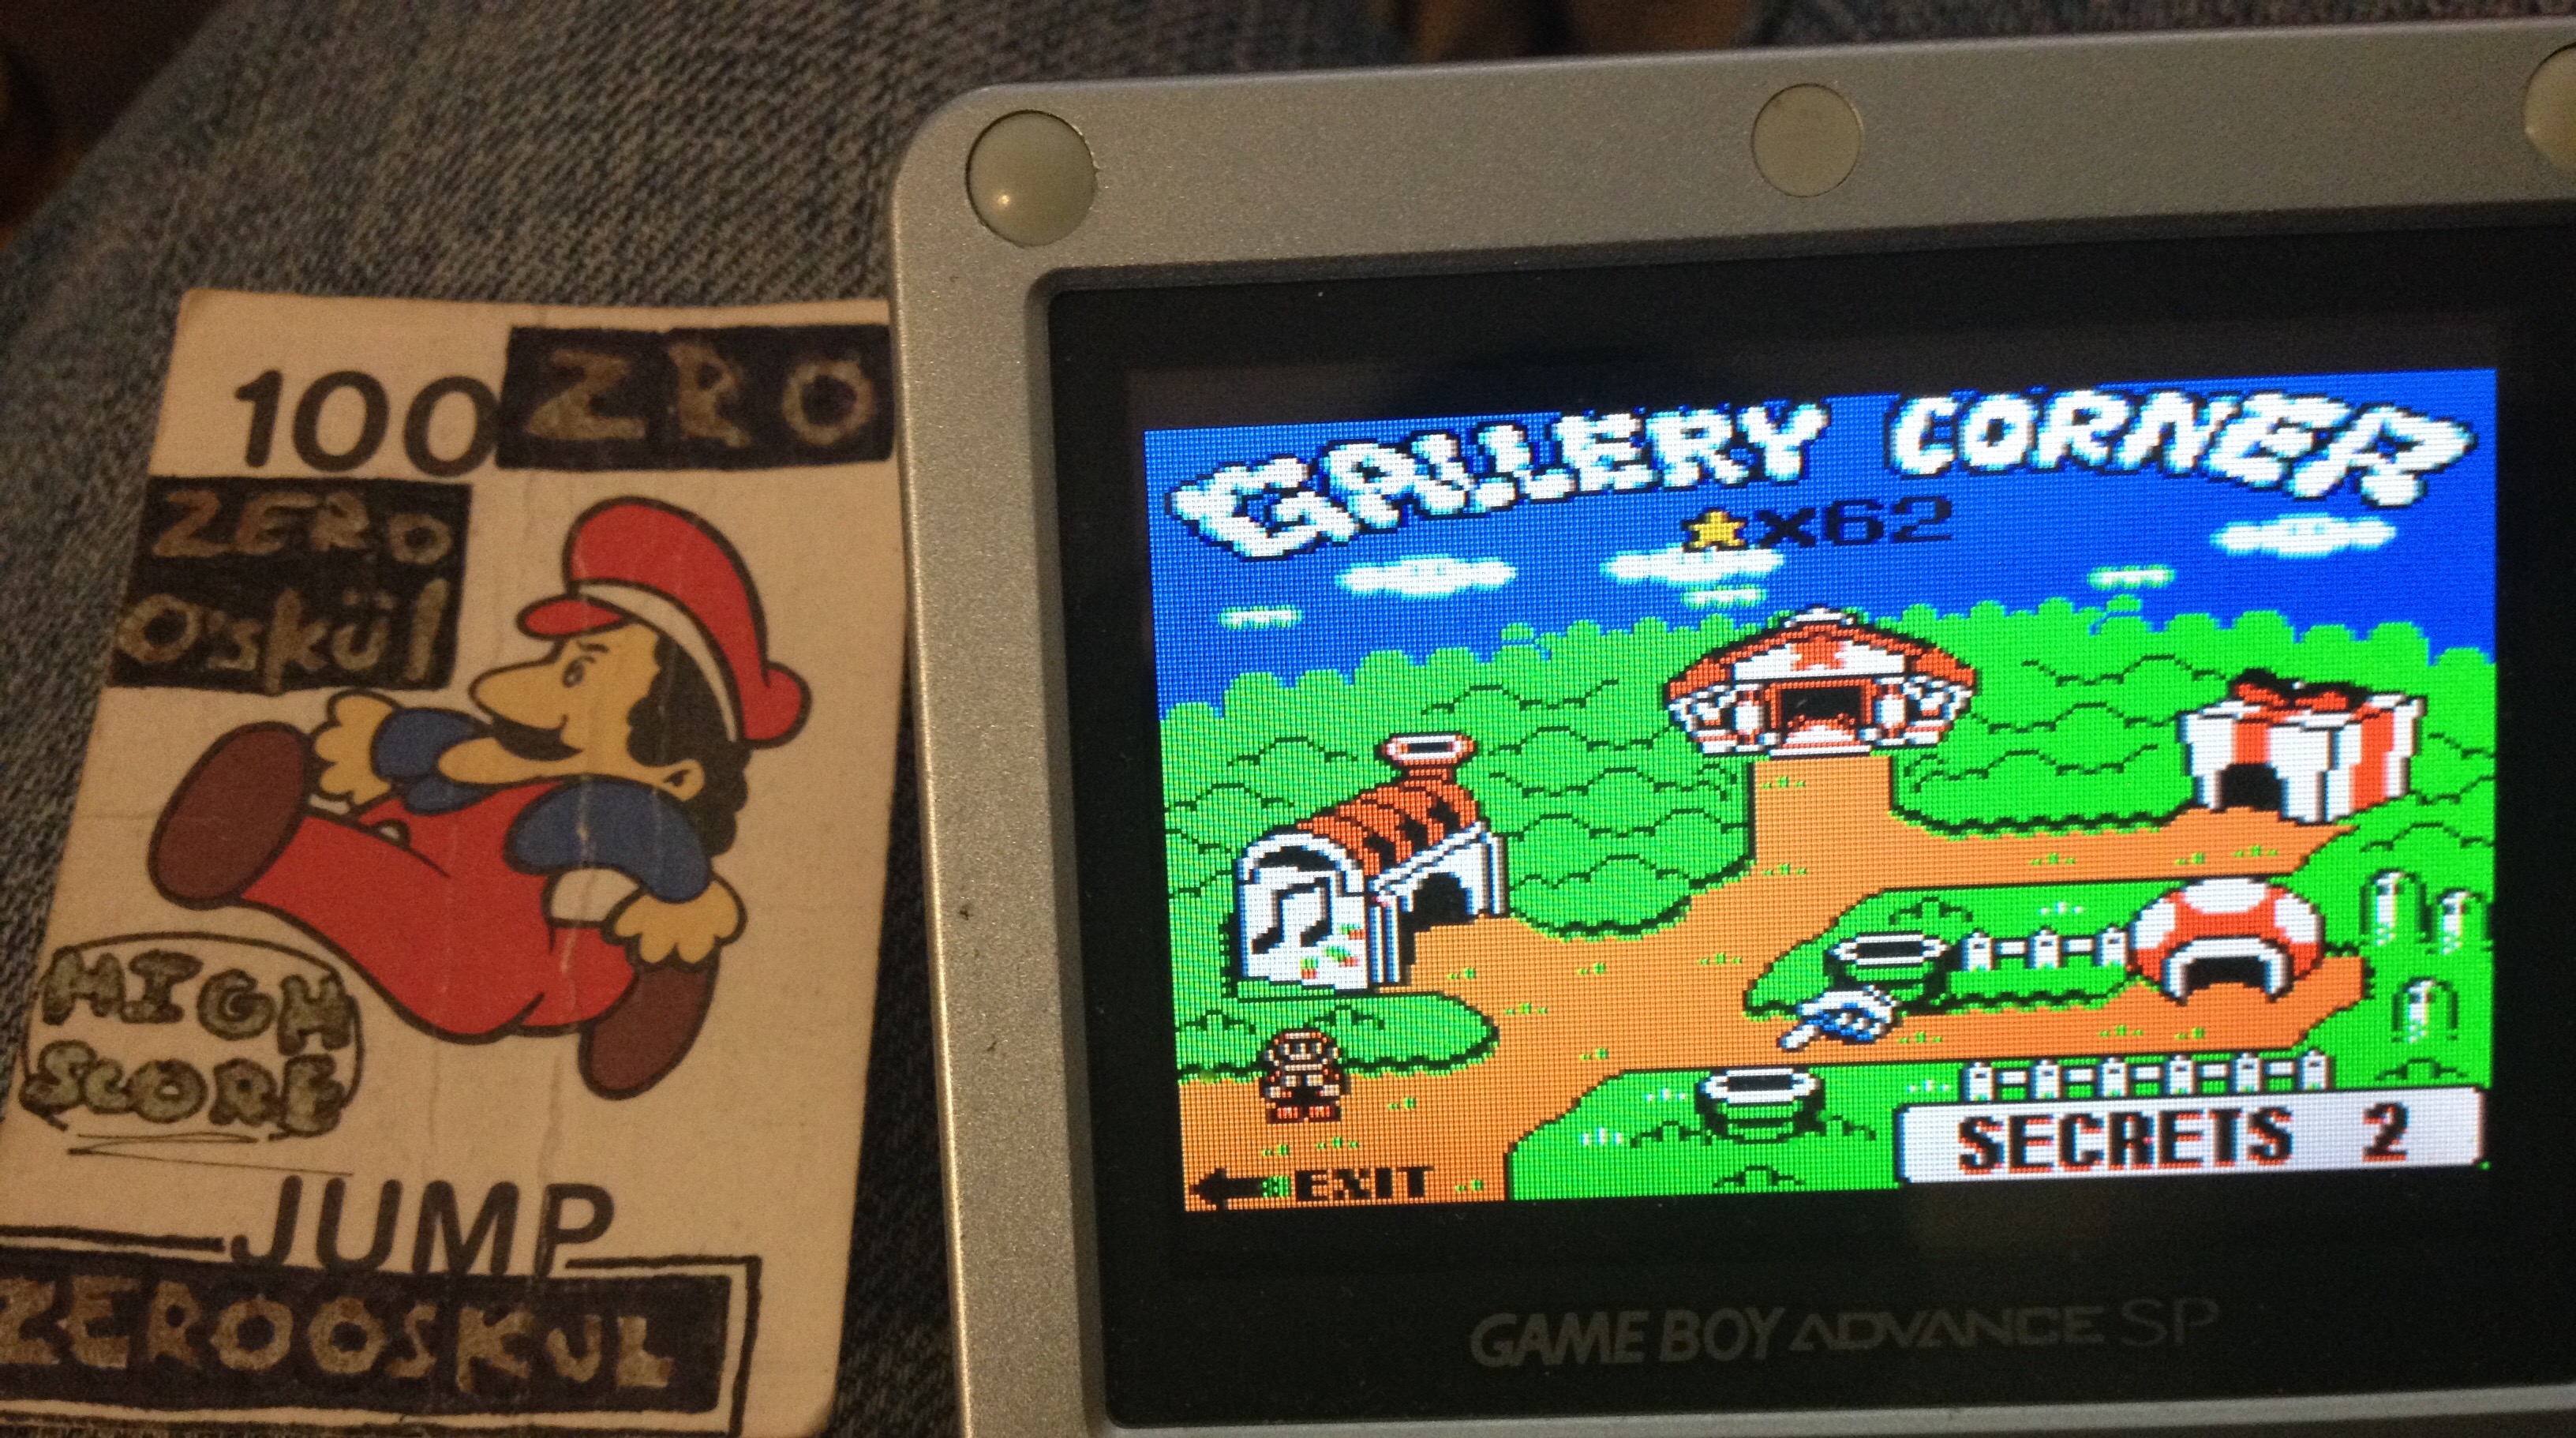 zerooskul: Game & Watch Gallery 3: Fire (Game Boy Color) 598 points on 2019-06-09 15:42:42